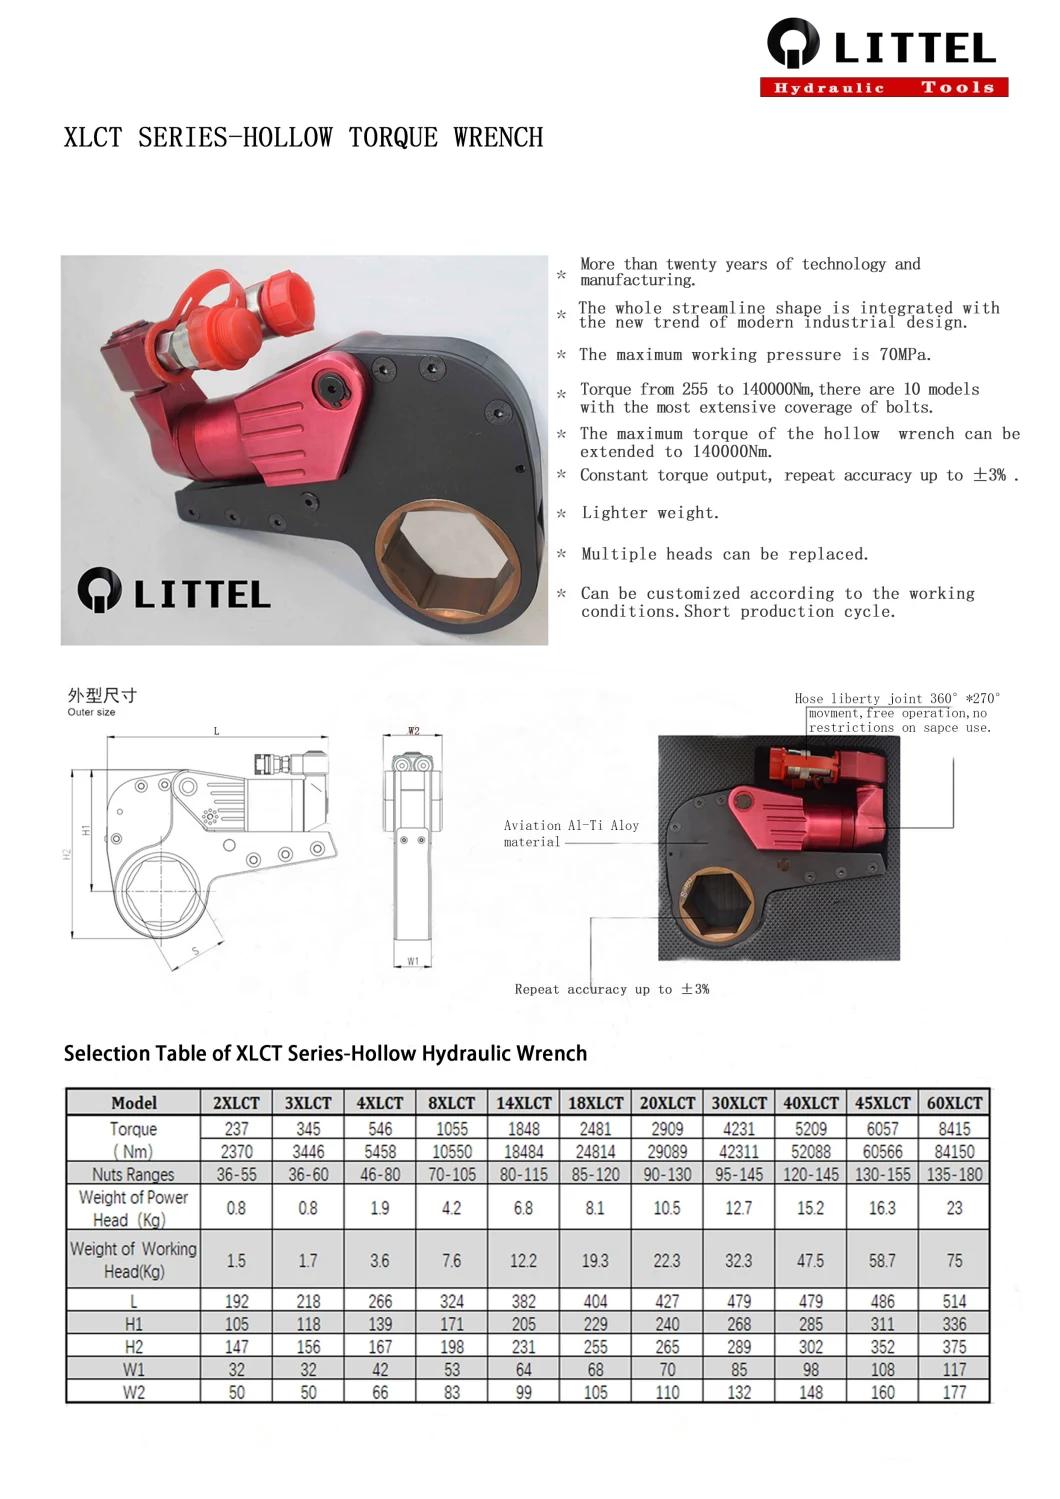 2xlct Al-Ti Alloy Hollow Hydraulic Torque Wrench Tools for Petrochemical Industry Sales by Manufacturer